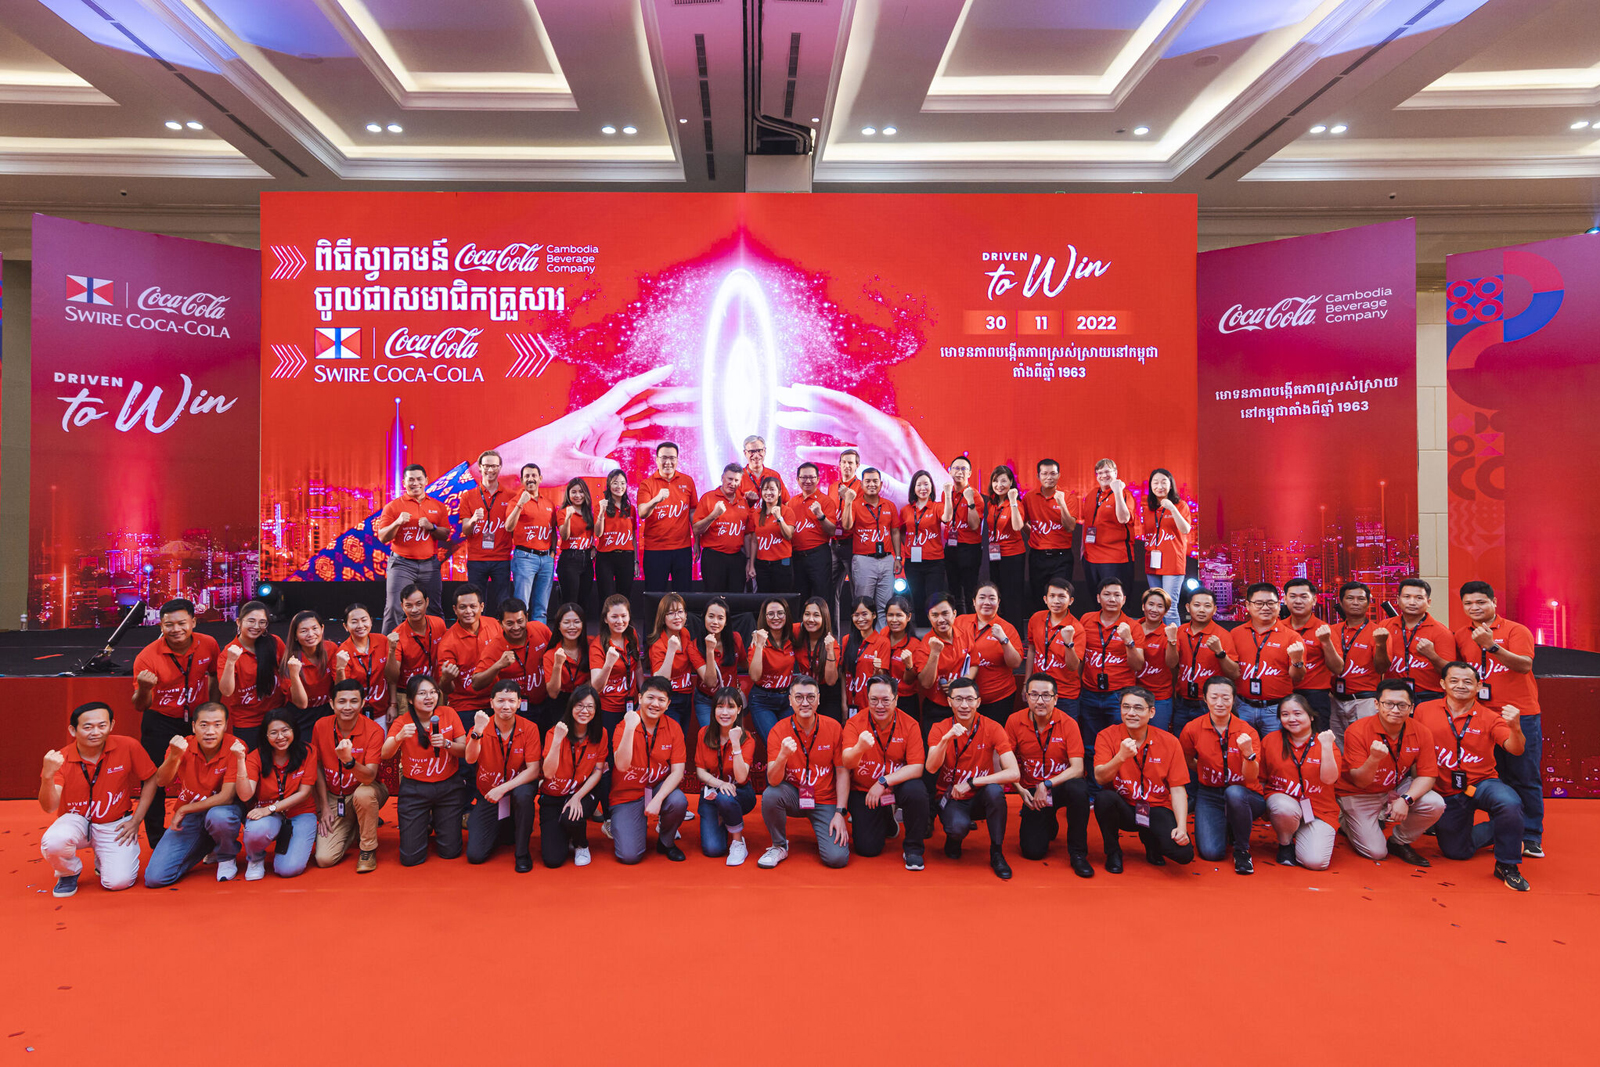 Swire Coca-Cola's expansion into South East Asia